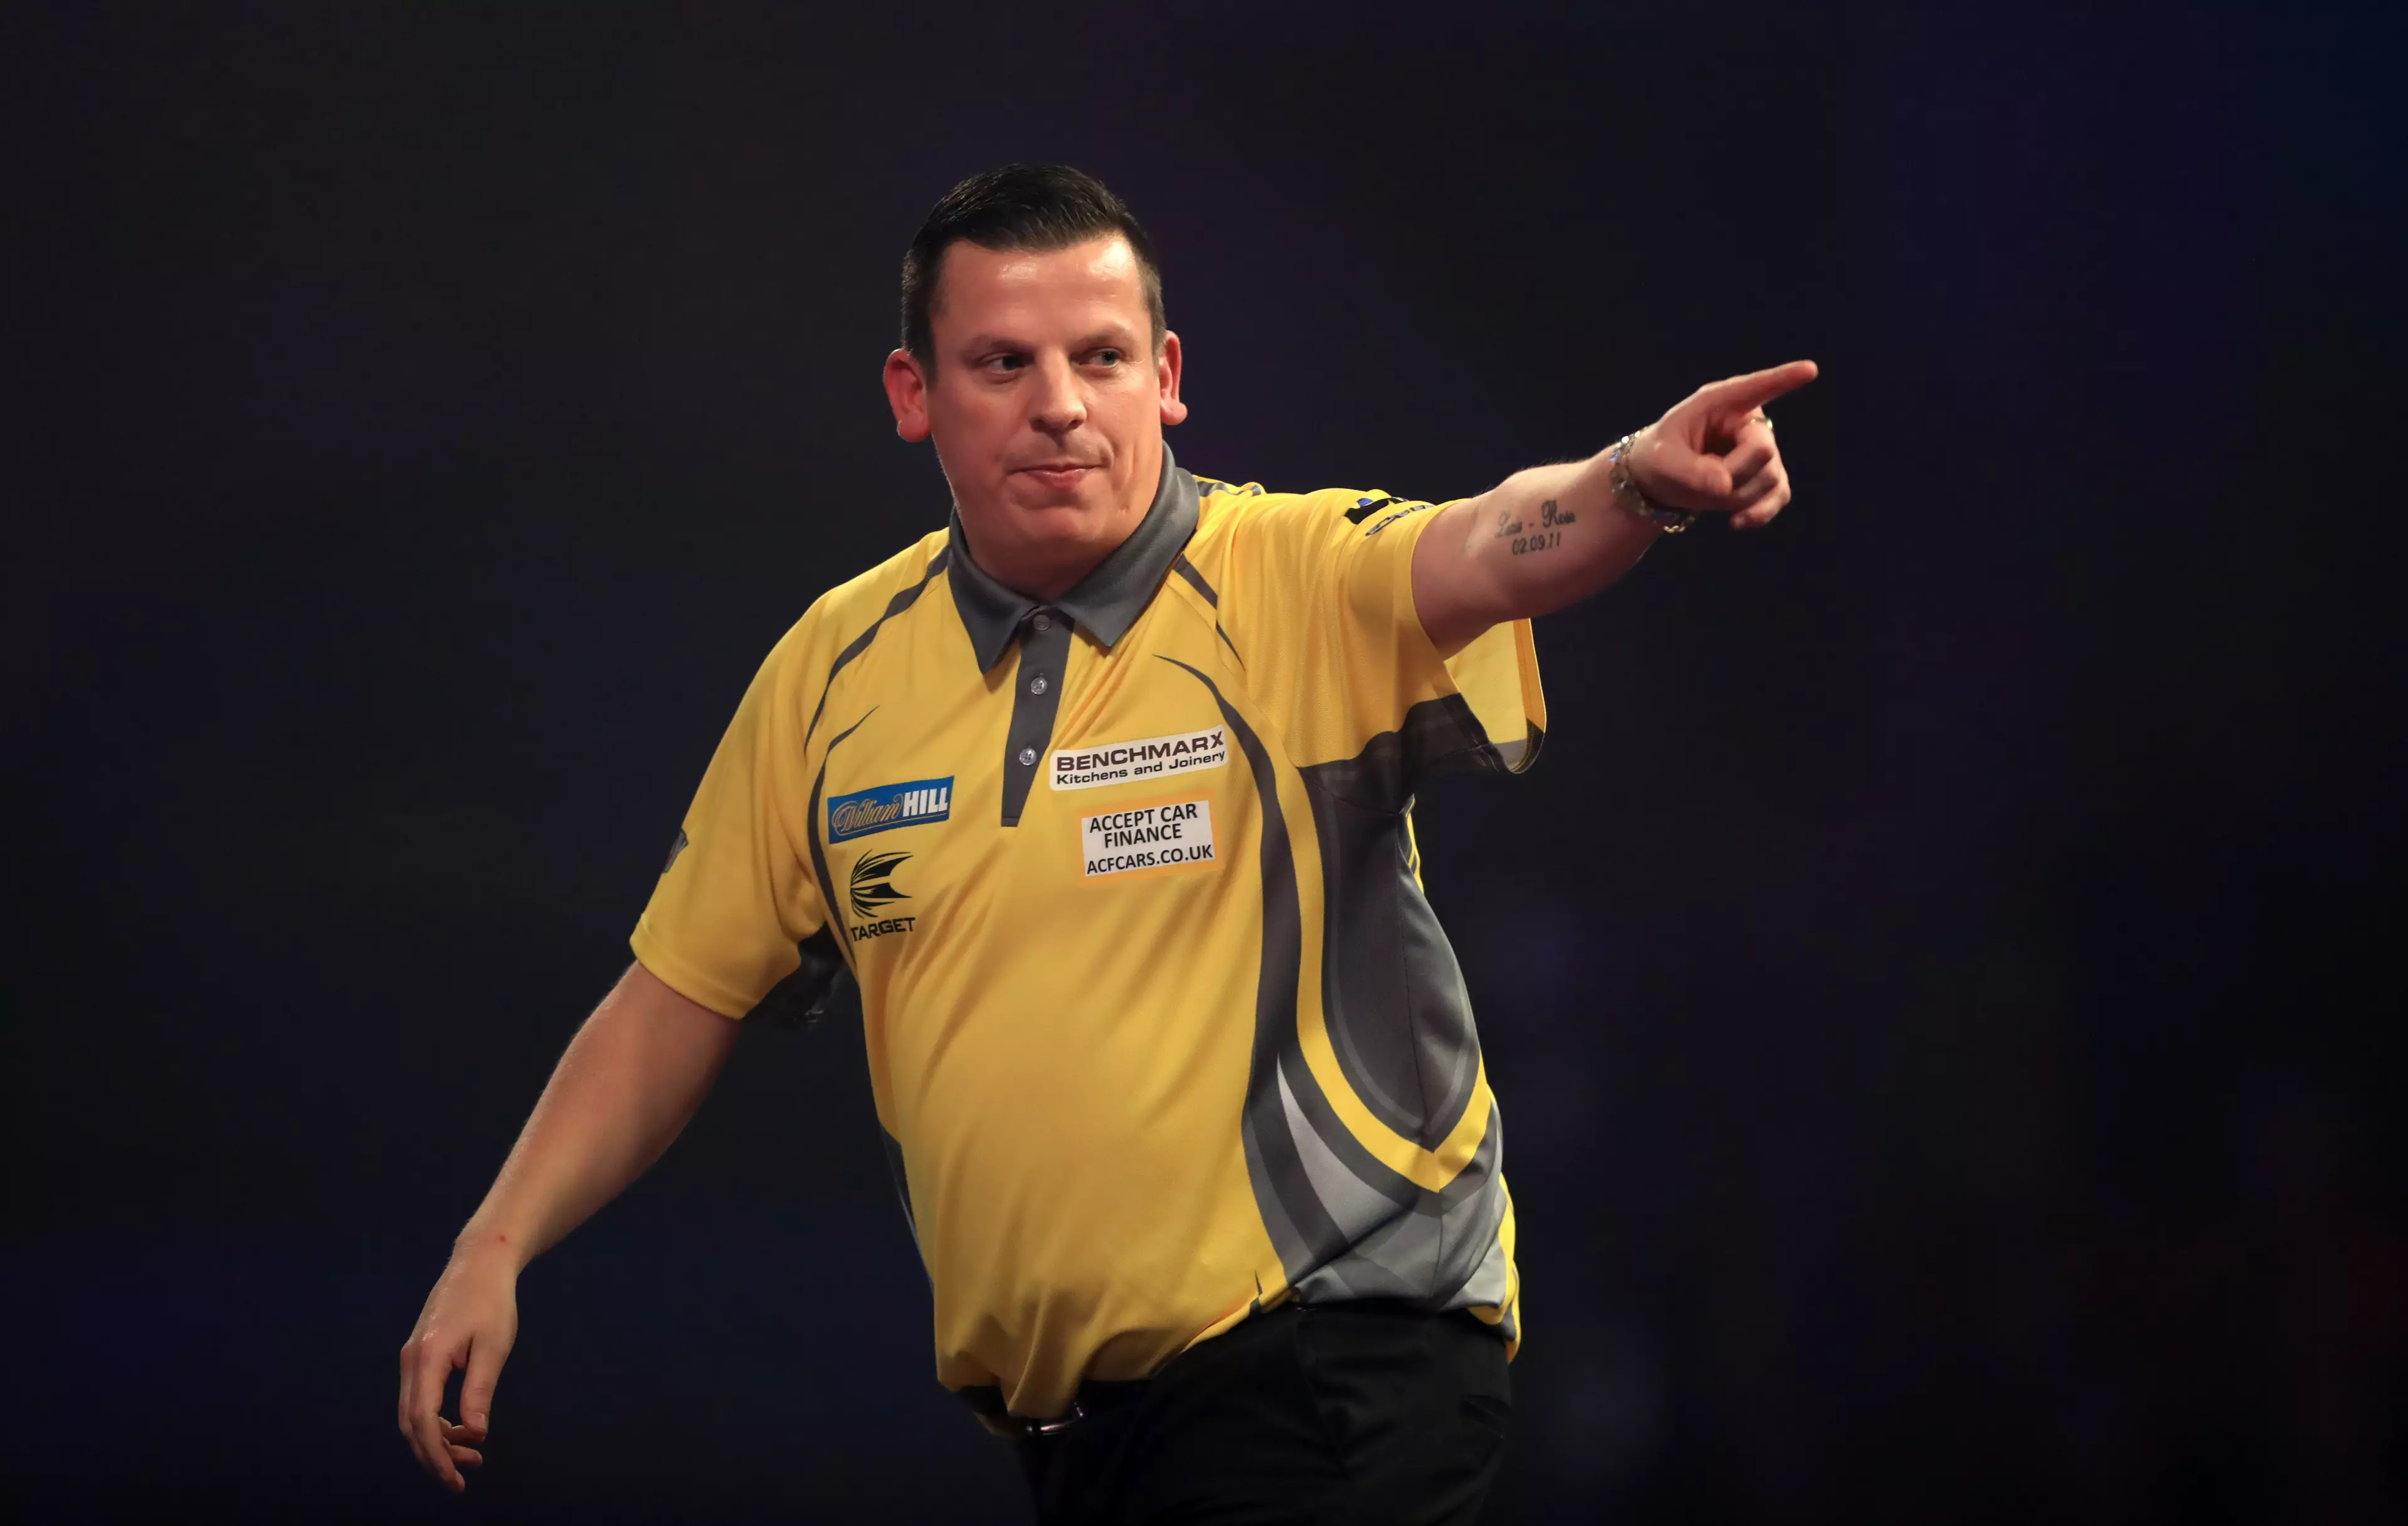 TheODDSbible's Premier League Darts Week Two Betting Preview